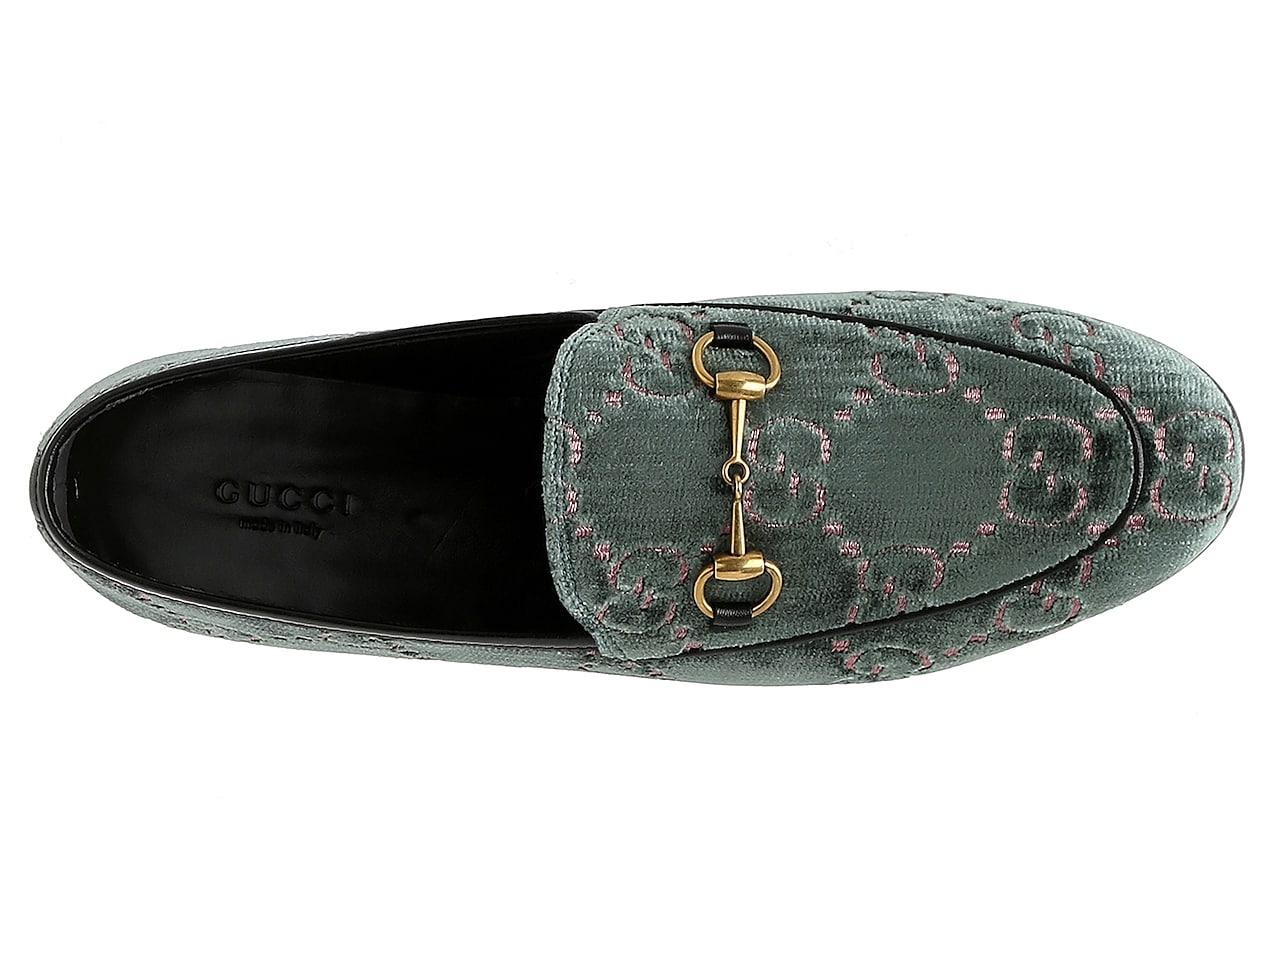 Gucci Leather New Jordaan Loafer in Dusty Blue/Pink (Blue) - Lyst